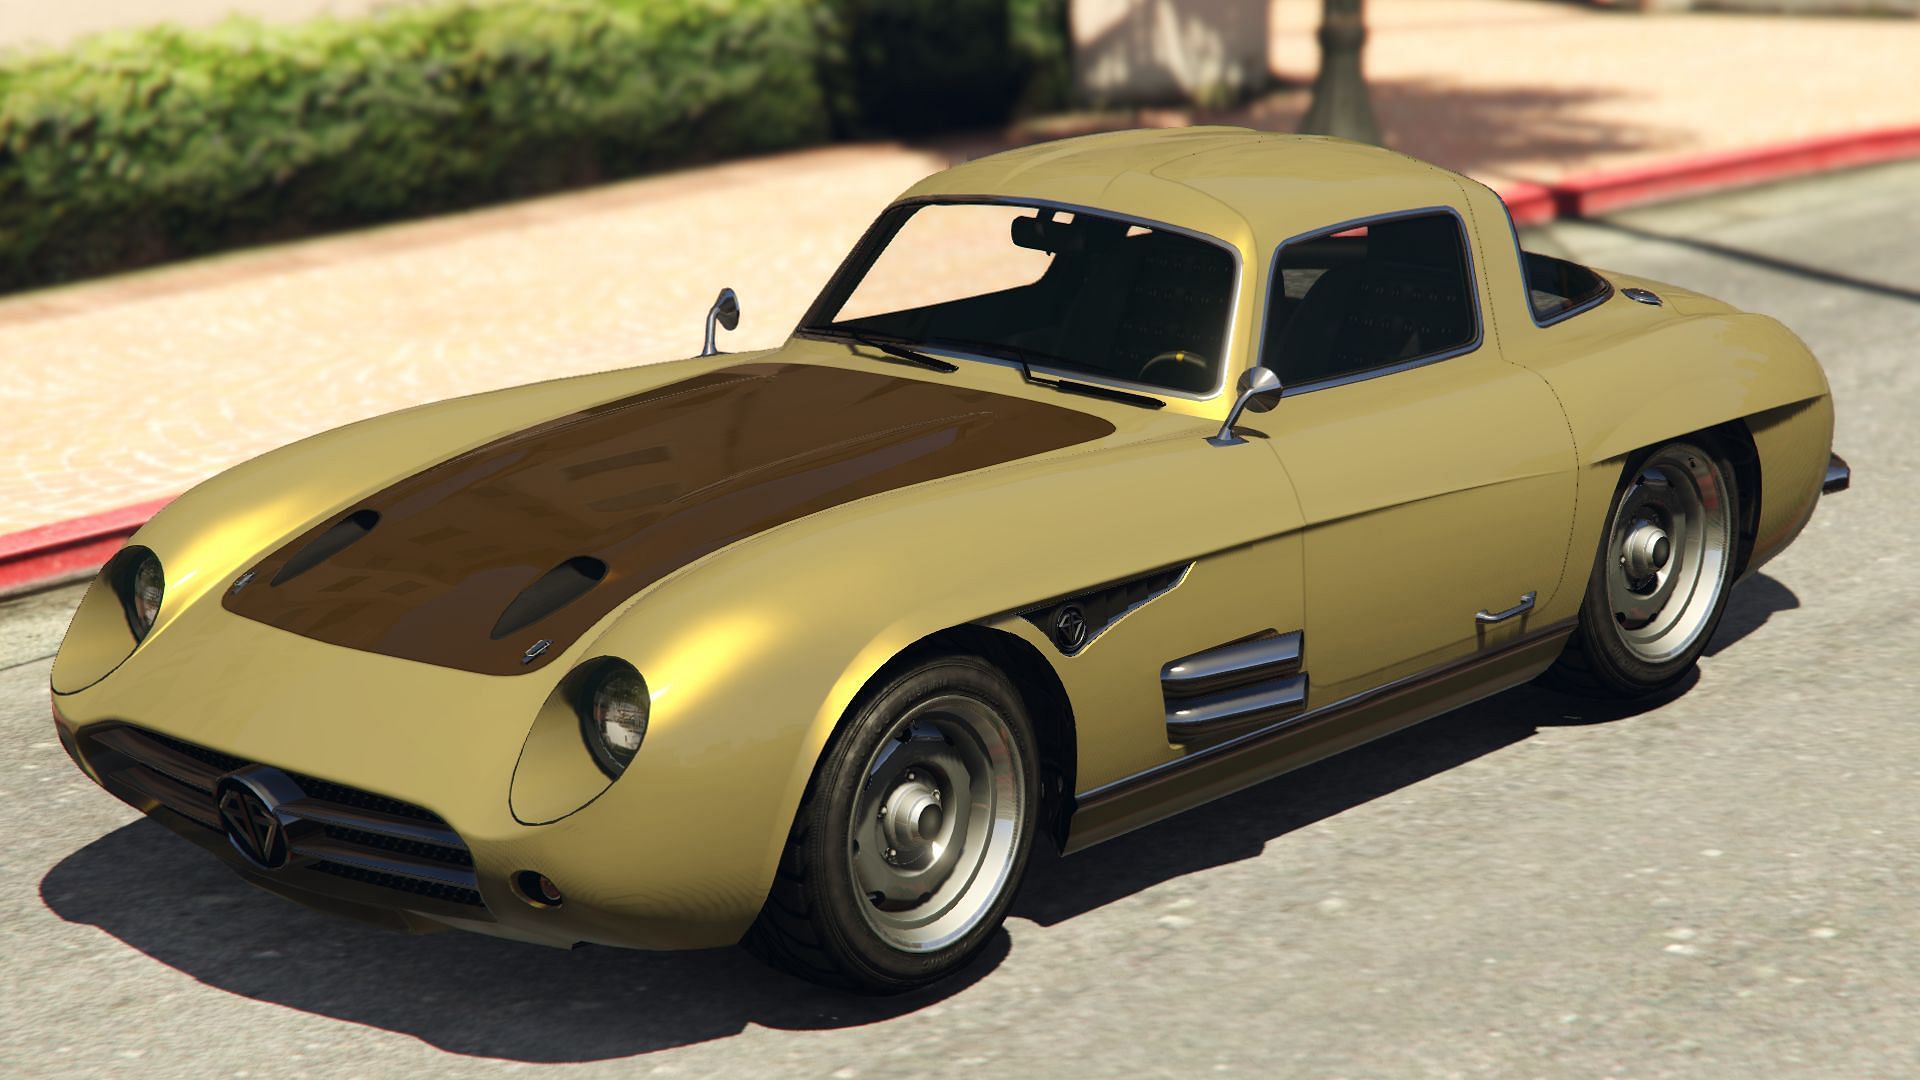 Most vehicles are limited to just one class (Image via GTA Wiki)